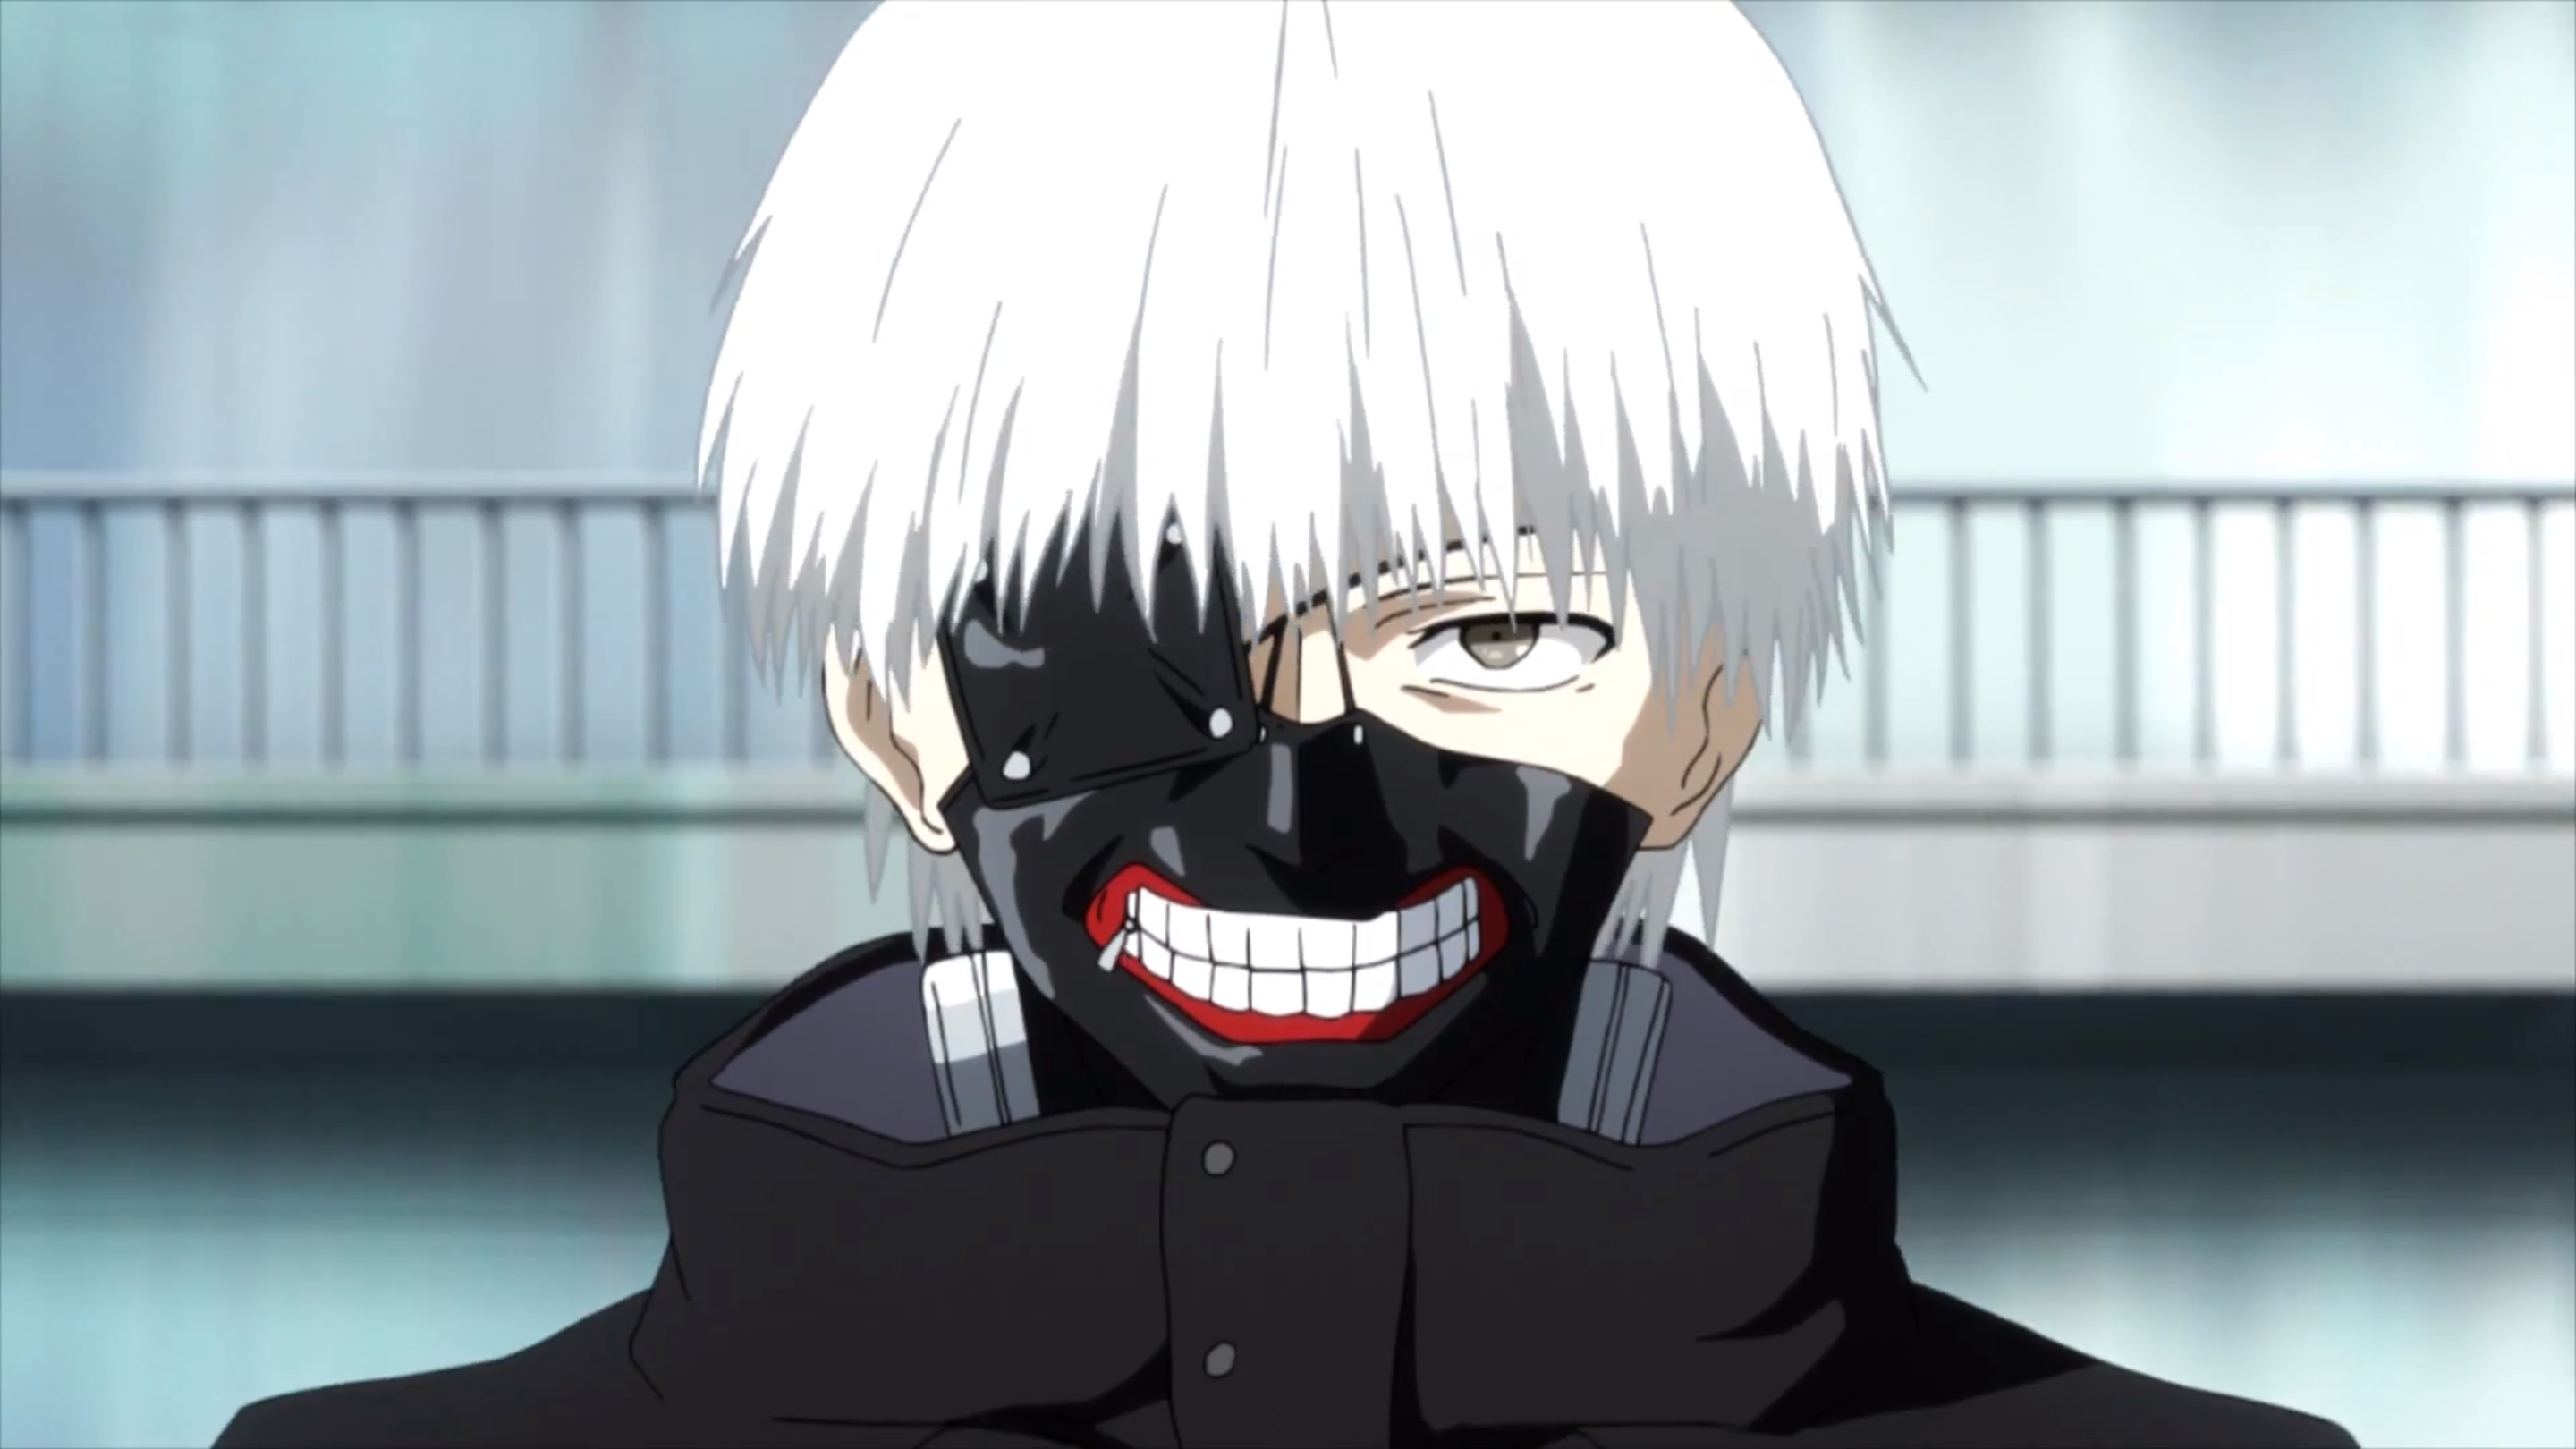 [7] After joining Anteiku as part time waiter he learned how to live as a ghoul and became known as Eyepatch via WIkia